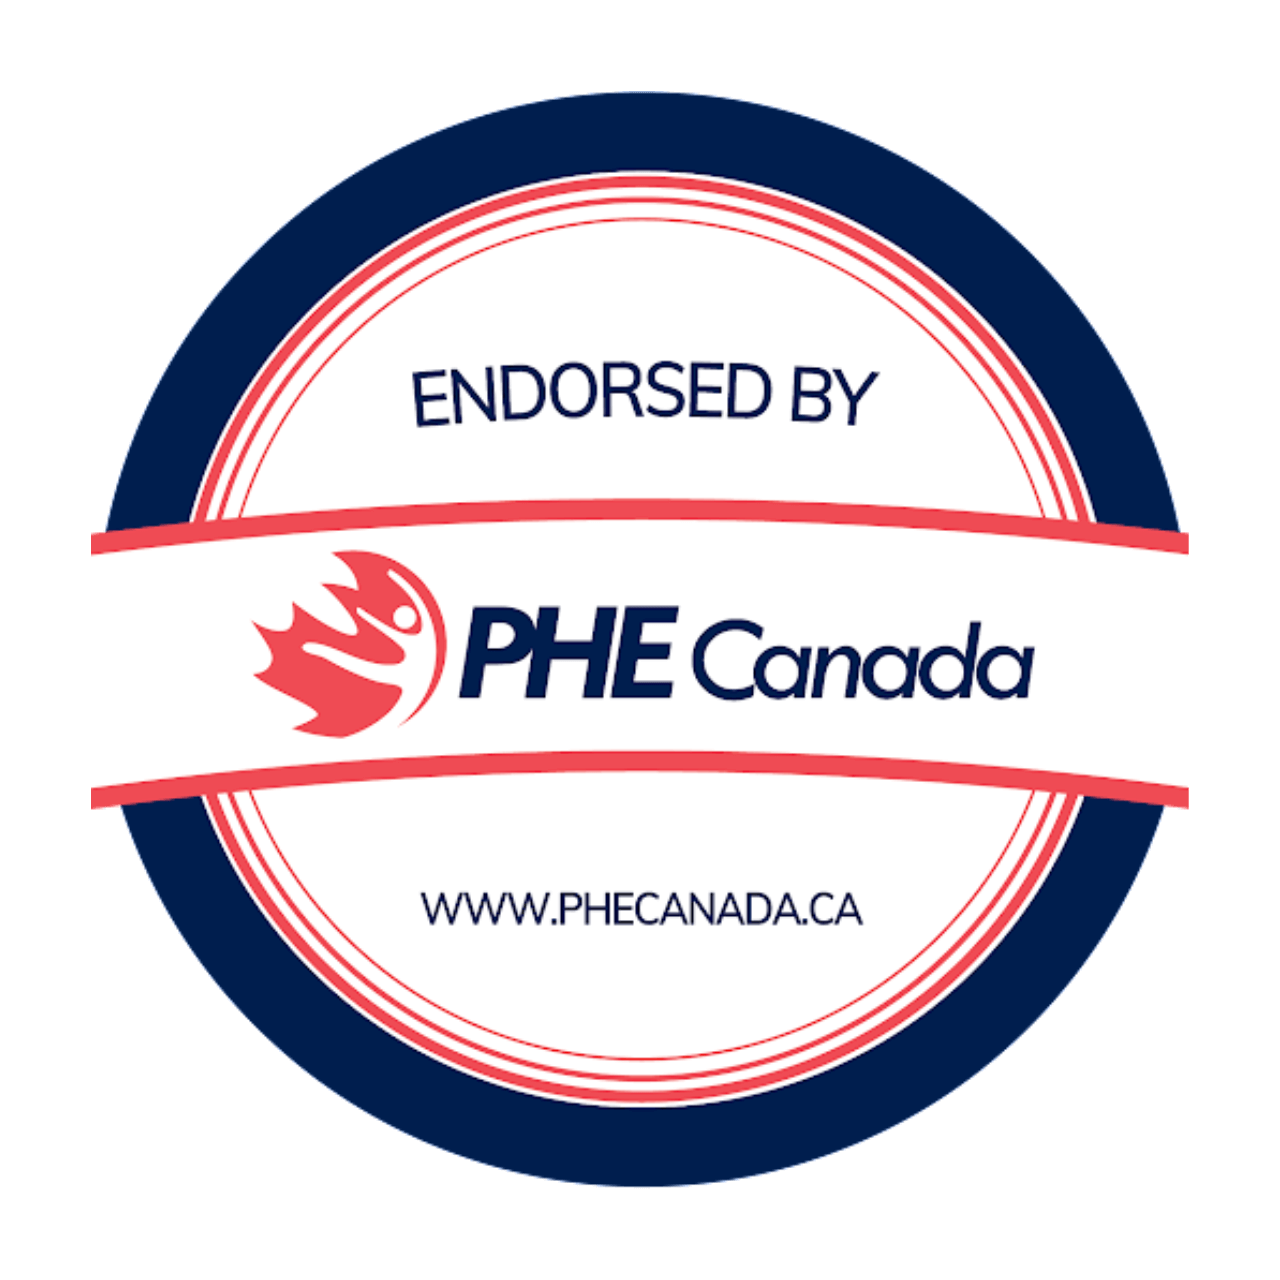 Endorsed by PHE Canada